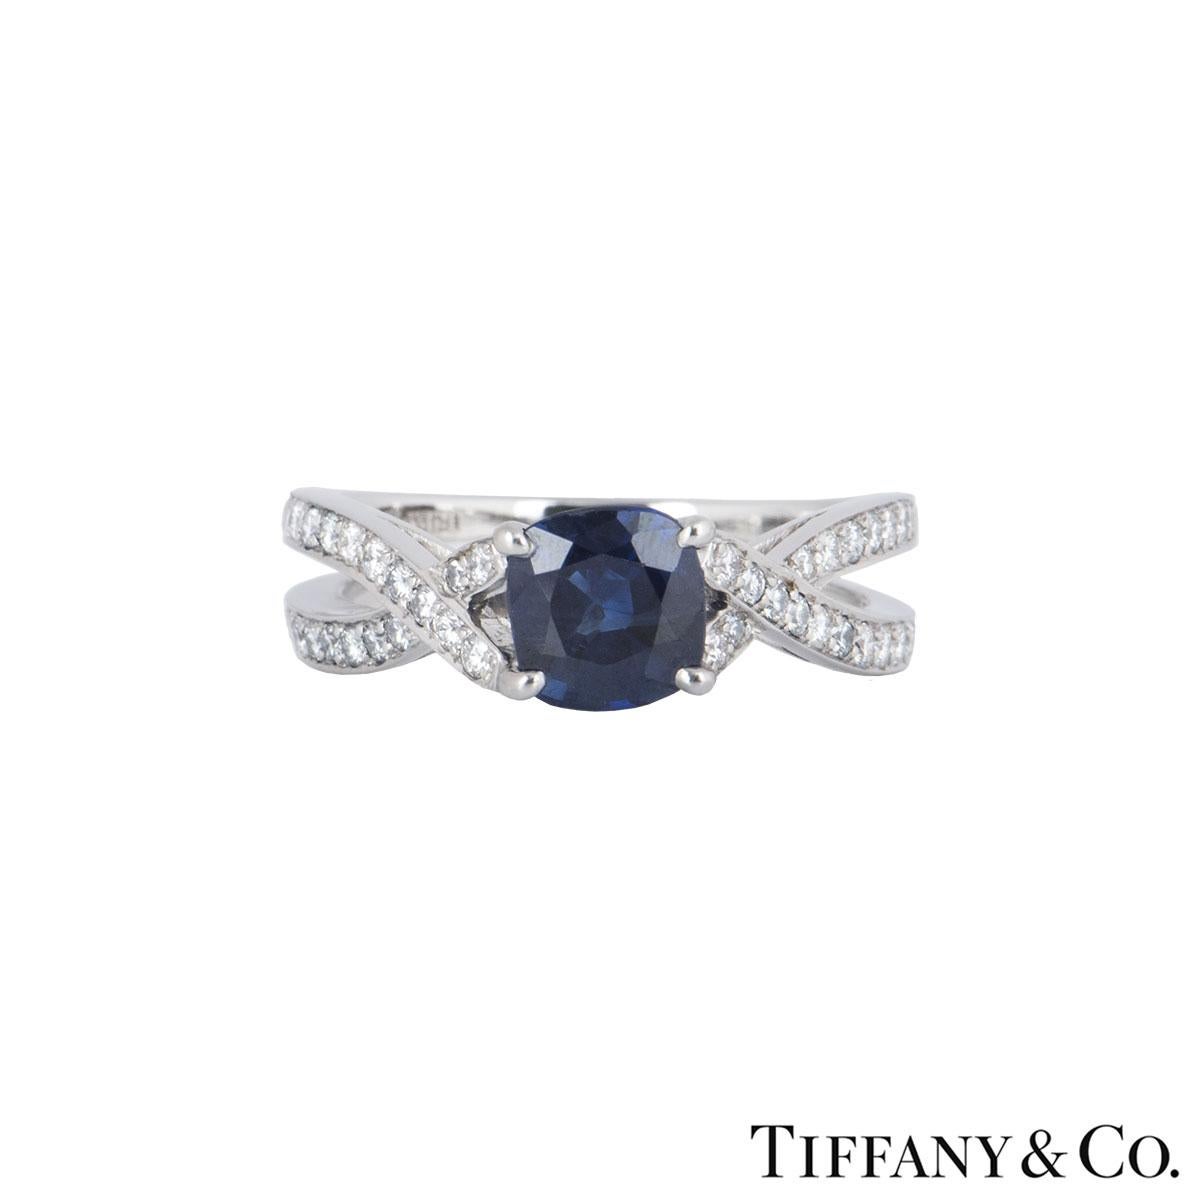 An impressive sapphire and diamond dress ring in platinum by Tiffany & Co. The ring comprises of a cushion shape sapphire with an approximate weight of 0.90ct. Surrounding the central stone are 38 round brilliant cut diamonds half set on the band in